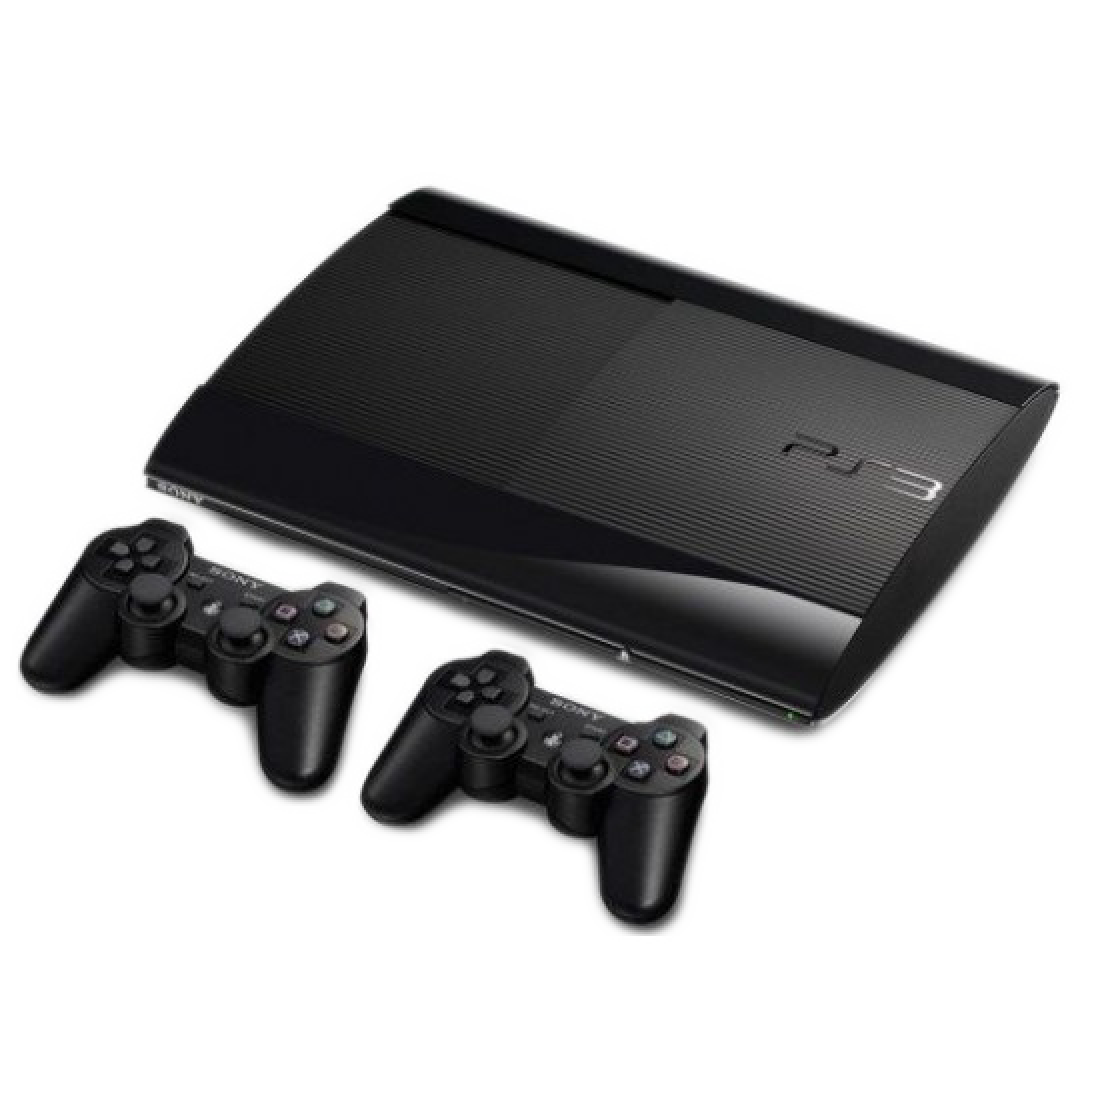 Playstation 3 ps3. Sony ps3 super Slim. Sony PLAYSTATION 3 super Slim. Ps3 super Slim 500gb. Sony PLAYSTATION 3 ps3 super Slim.